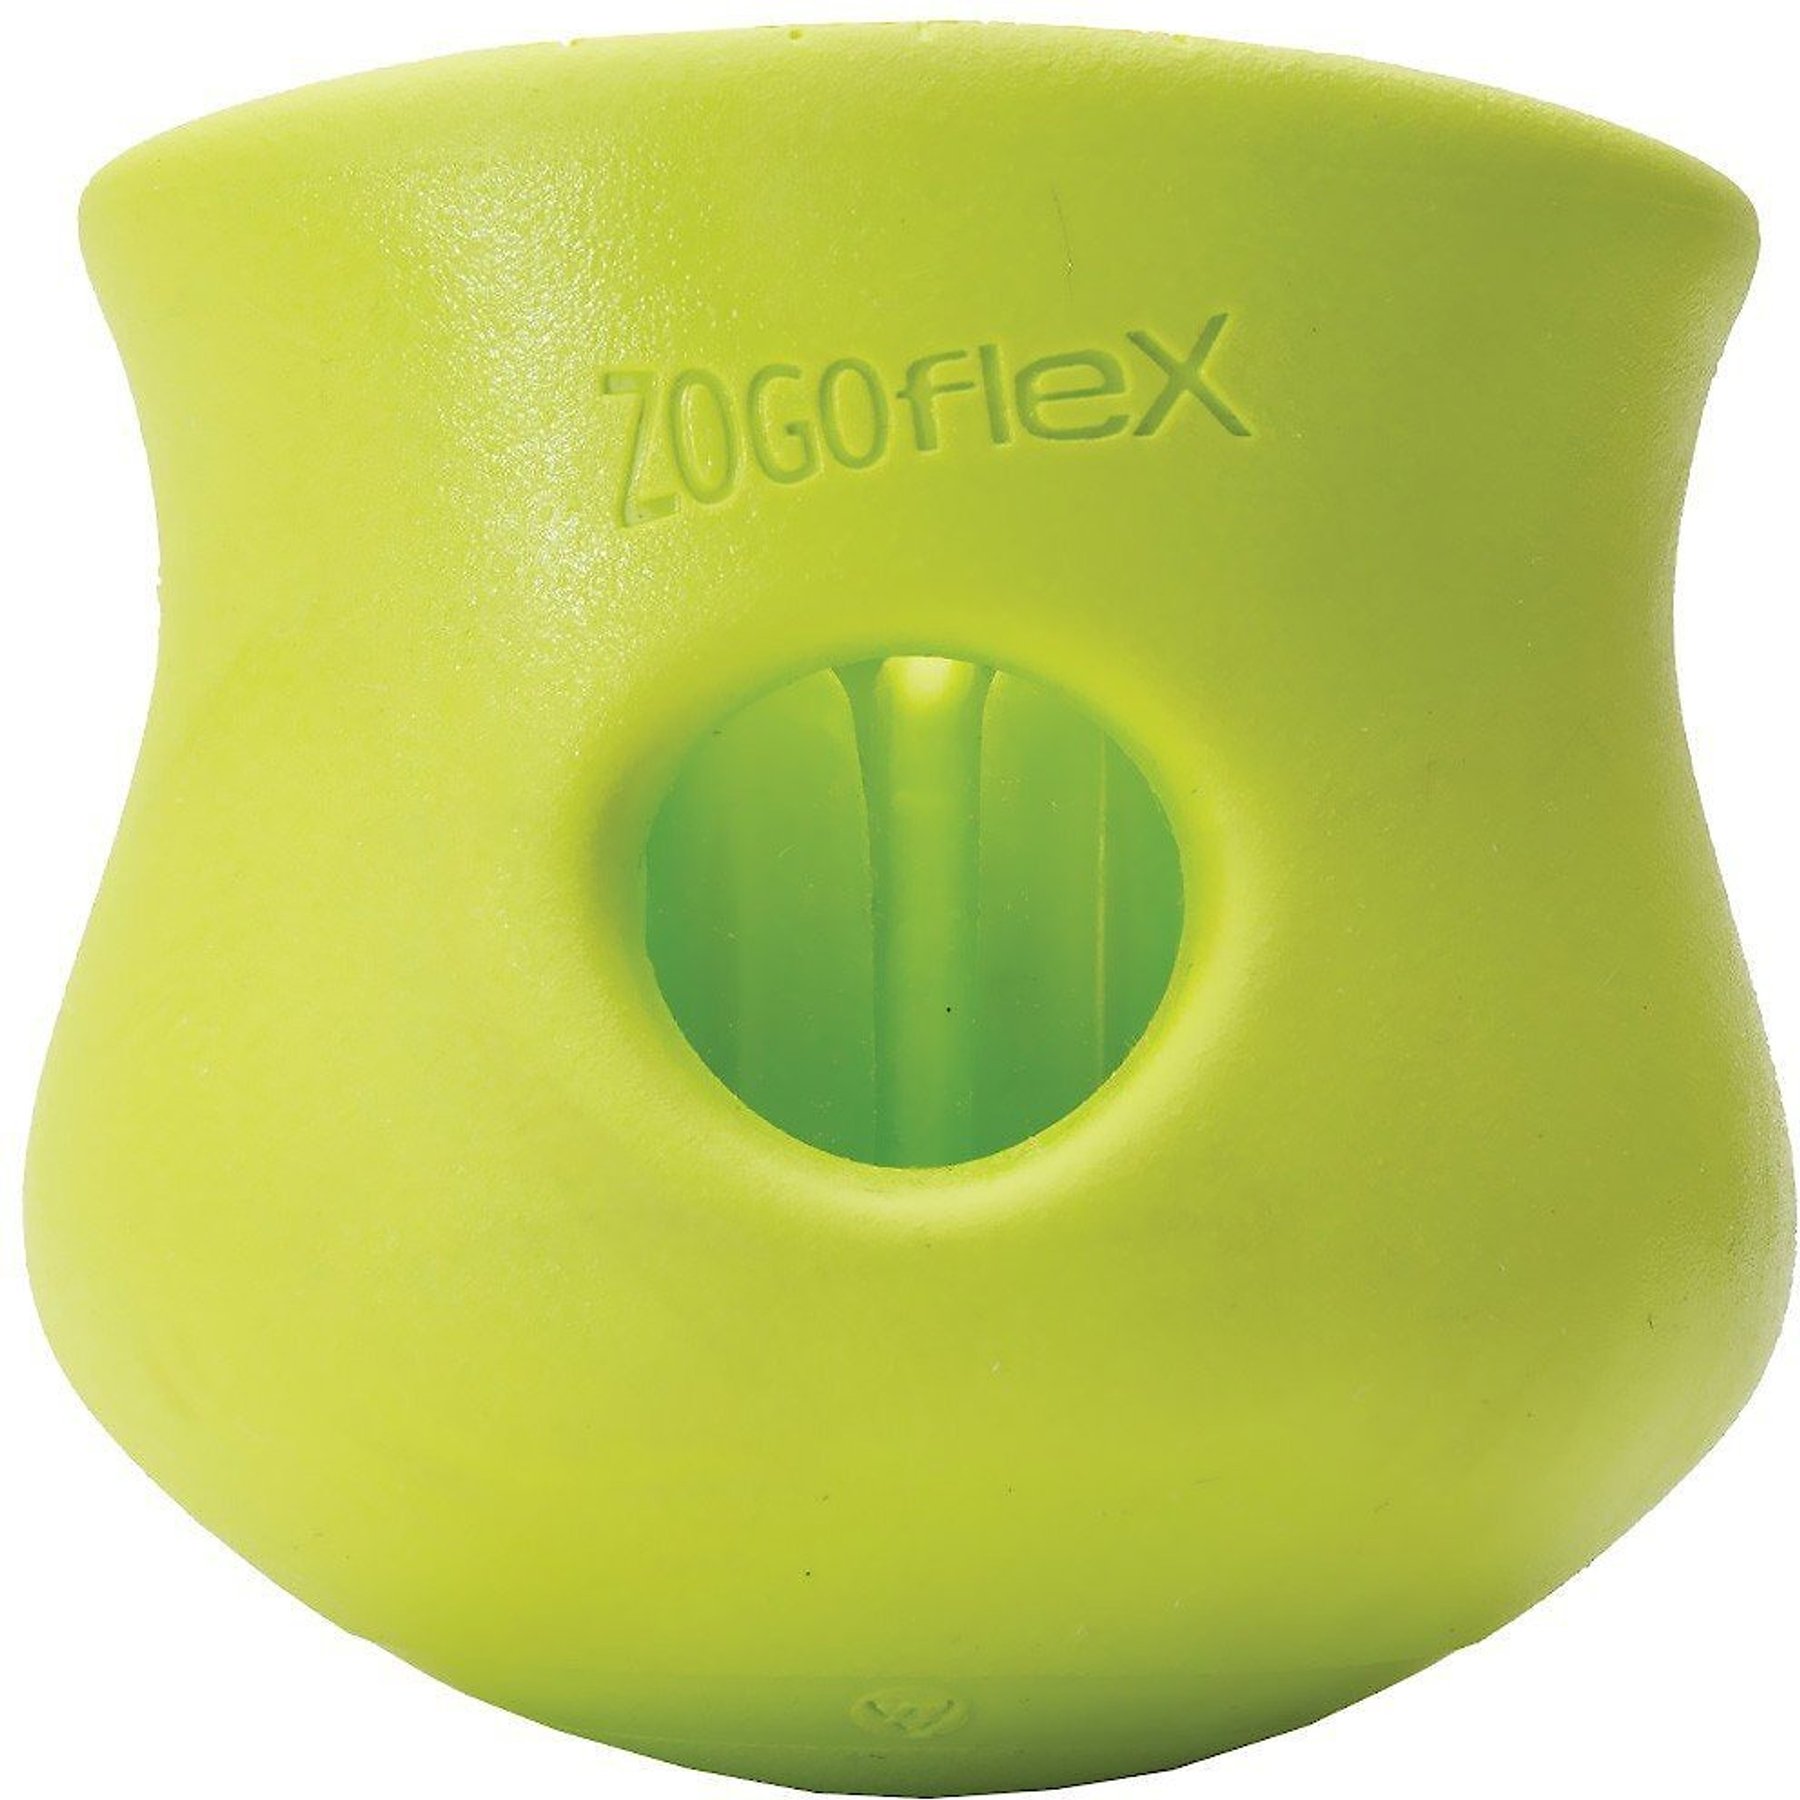 West Paw Zogoflex Toppl Interactive Treat Dispensing Dog Puzzle Play Toy,  100% Guaranteed Tough, It Floats!, Made in USA, Small, Granny Smith